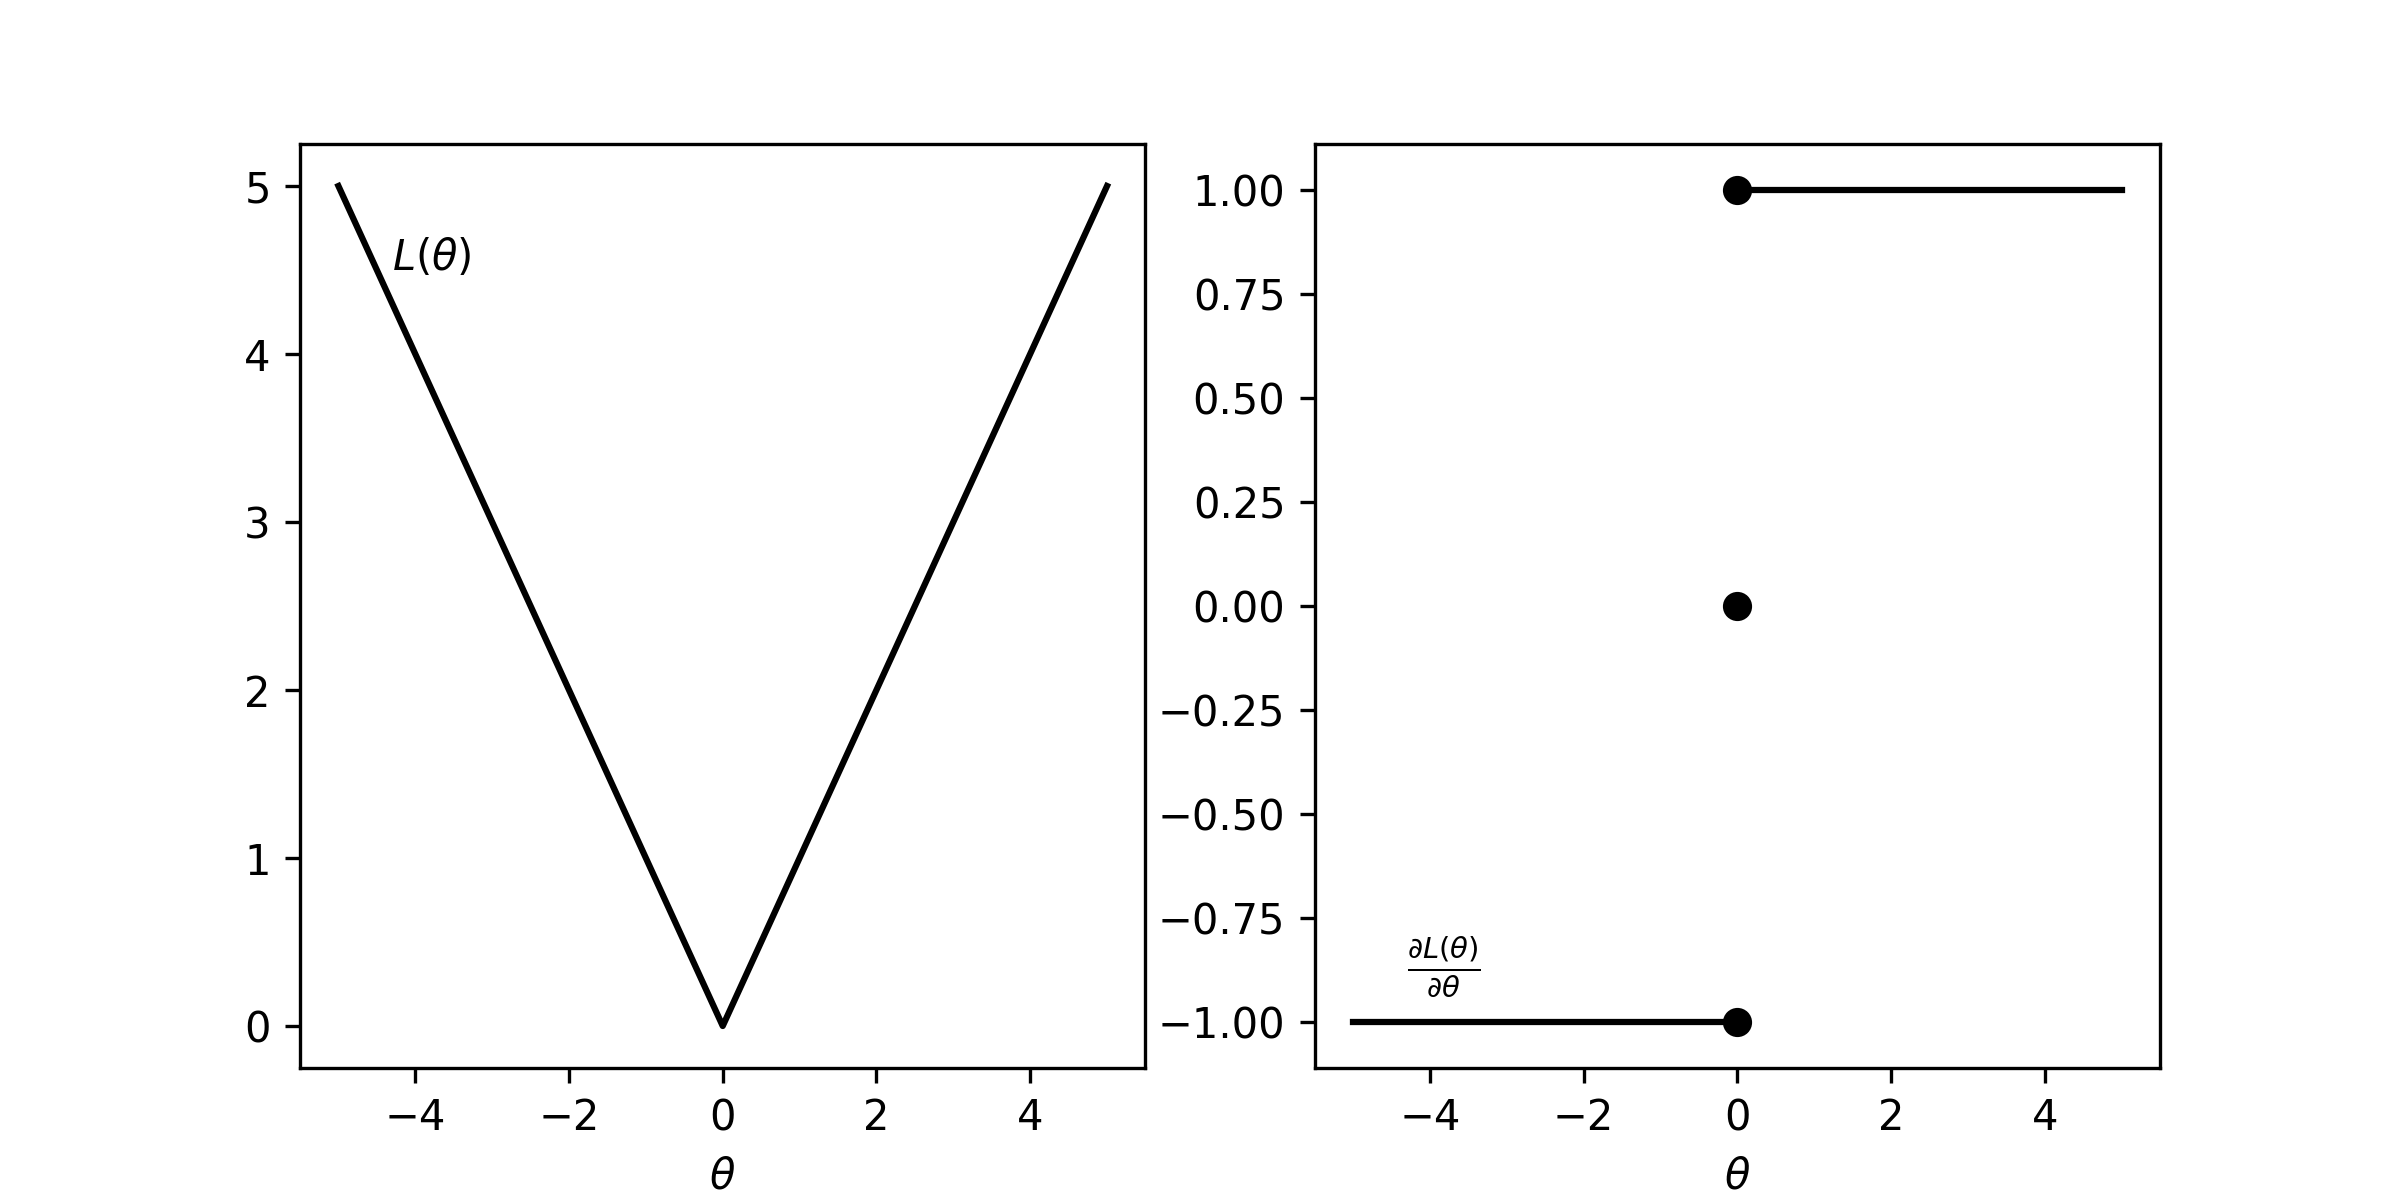 The gradient and the loss function for the mean absolute error